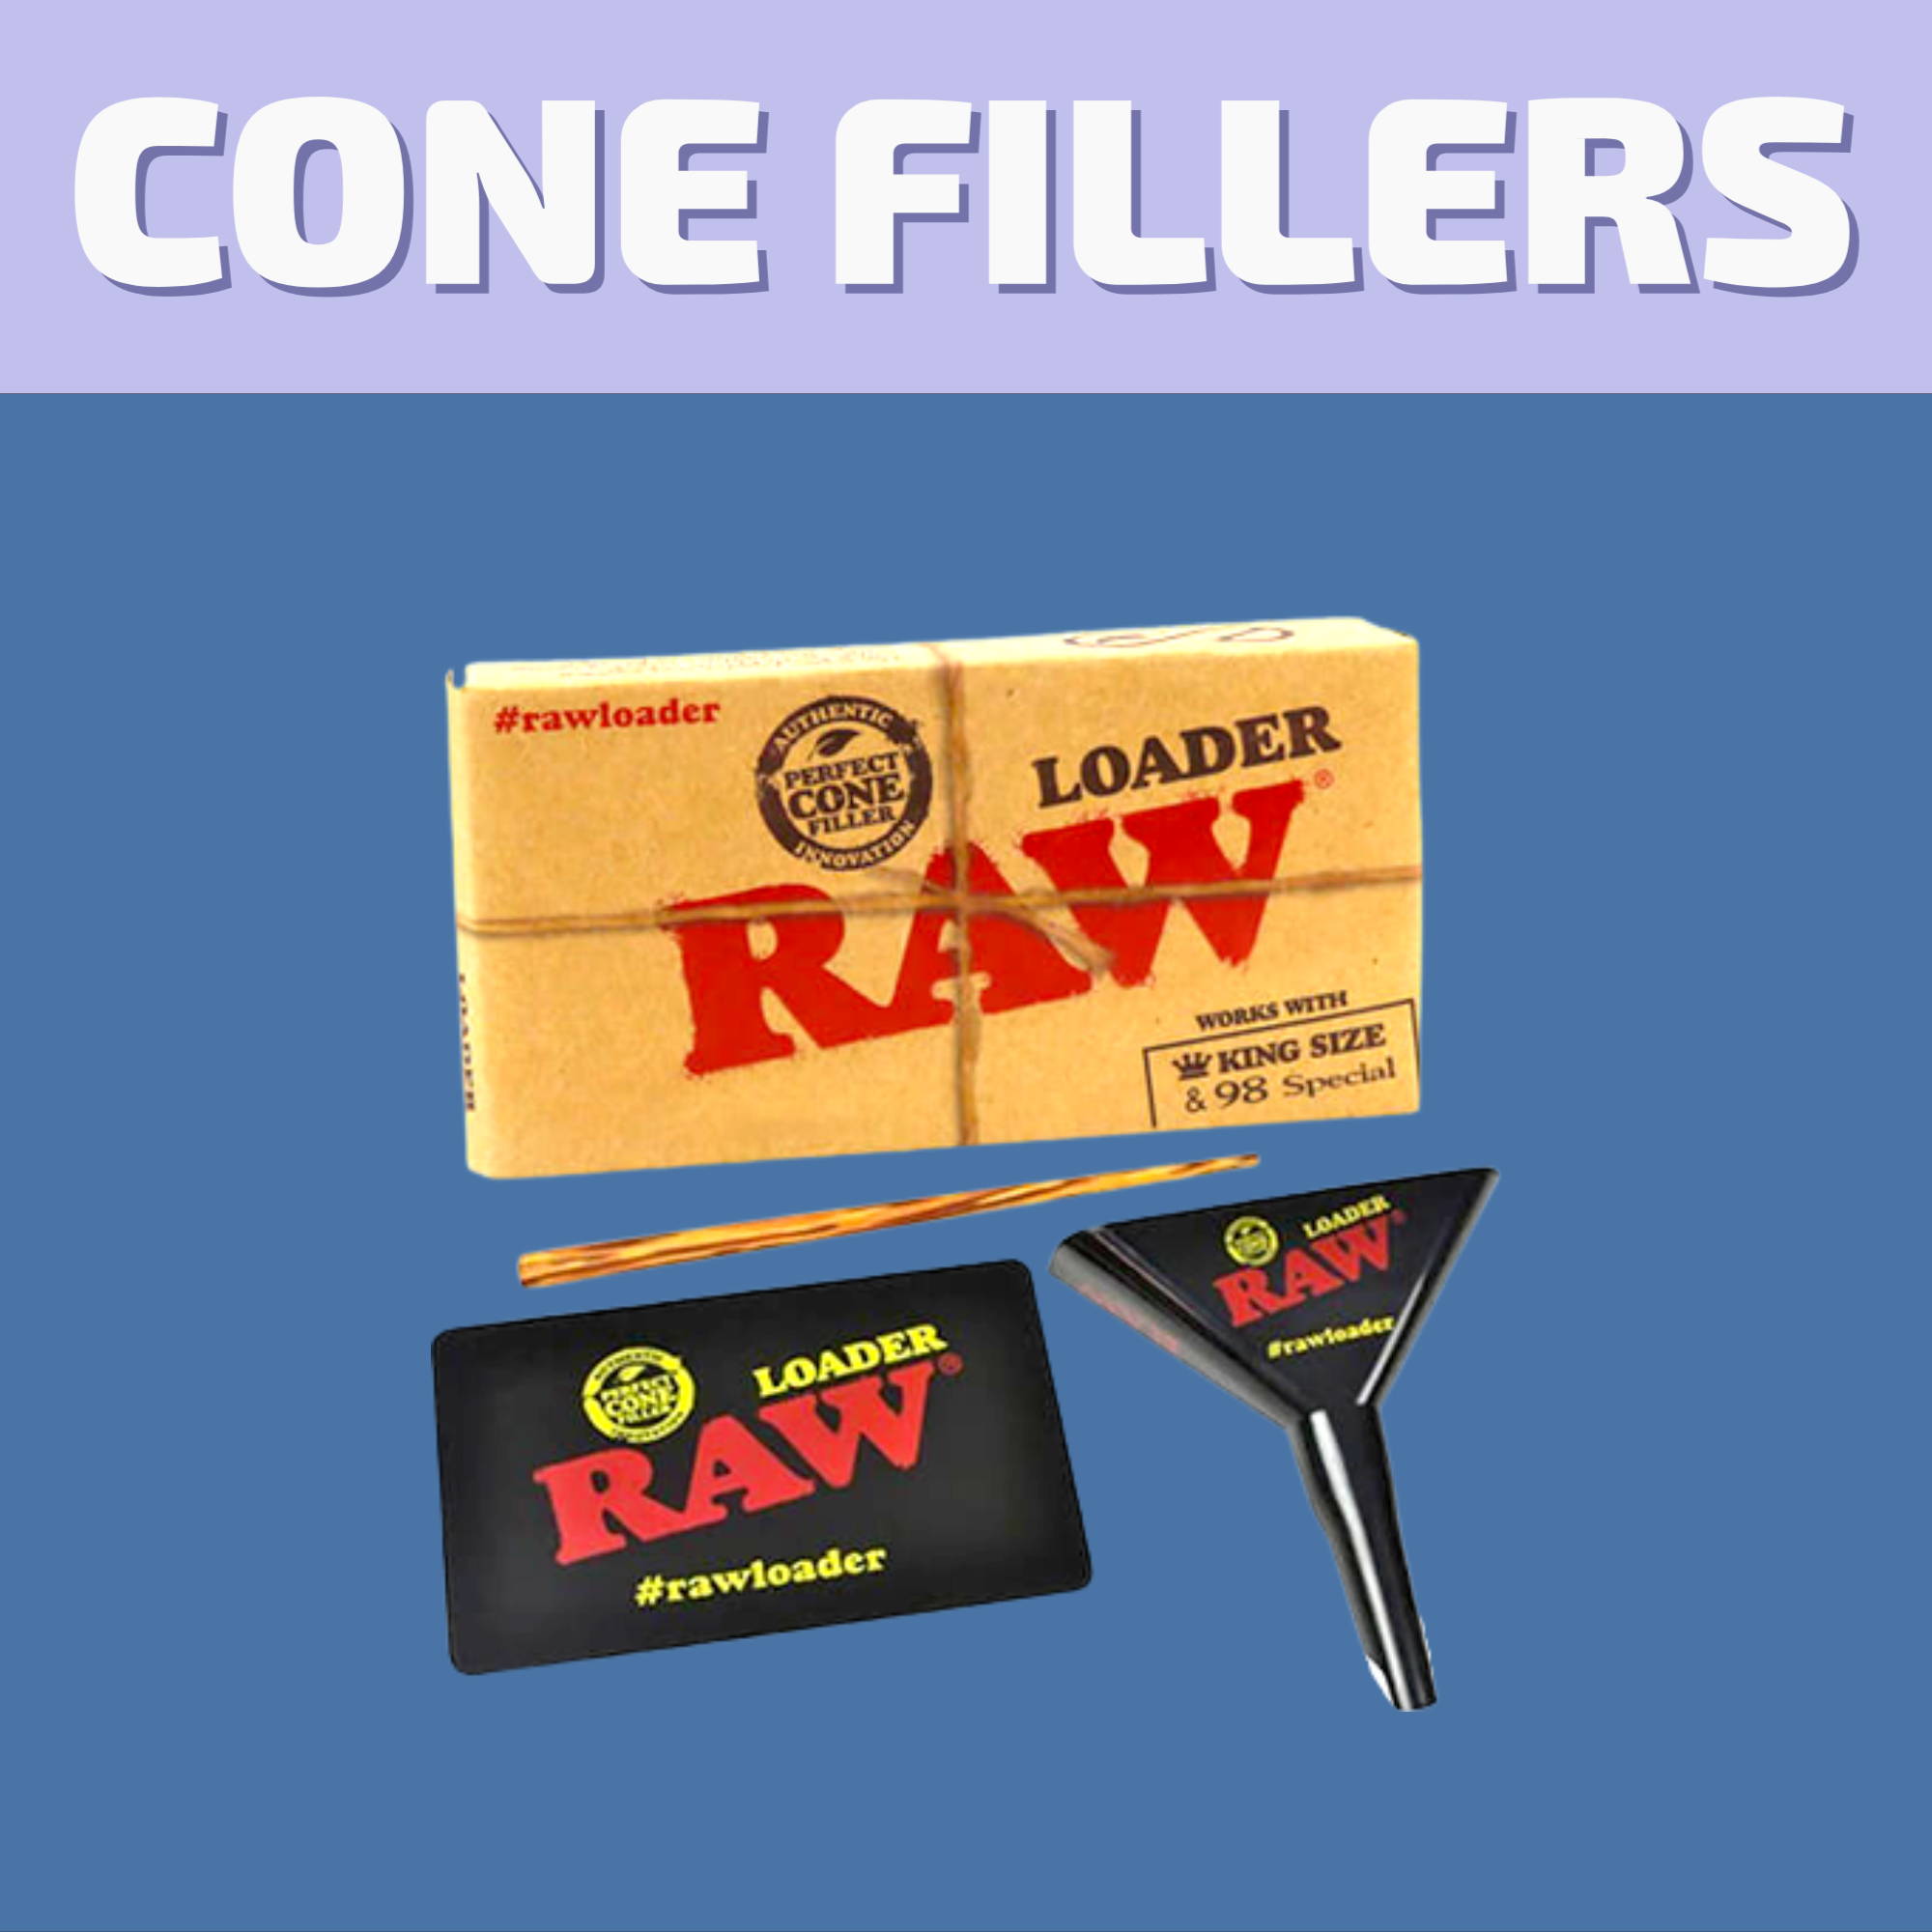 Shop our selection of Cone Fillers for same day delivery in Winnipeg or visit our cannabis store on 580 Academy Road.   